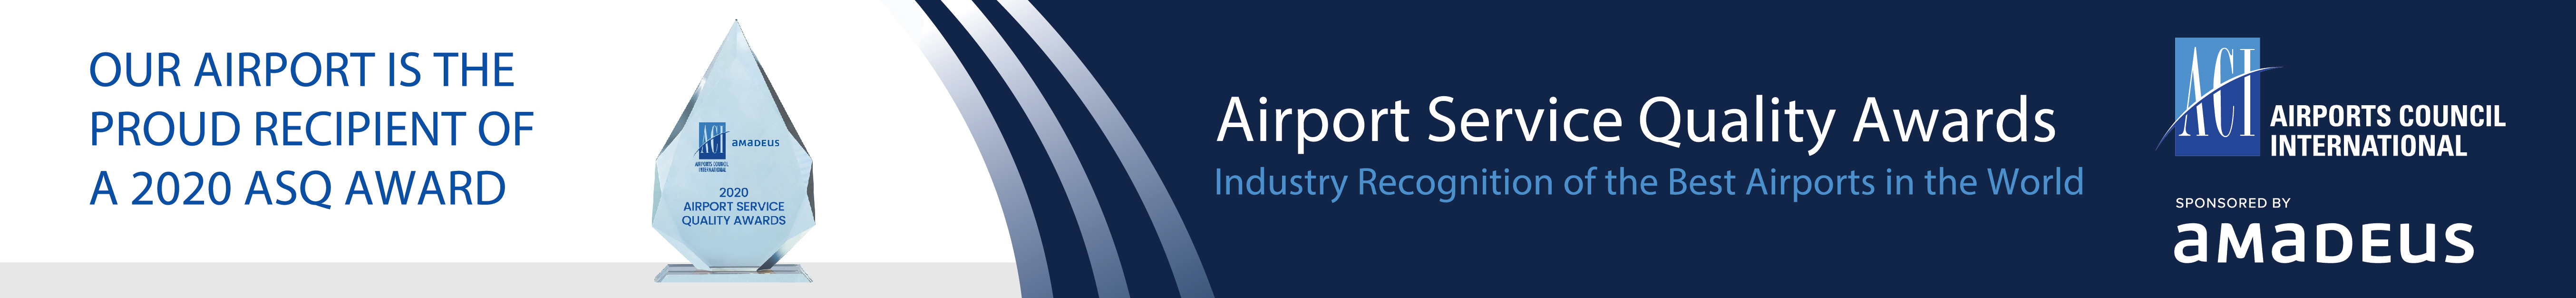 Airport Service Quality Awards